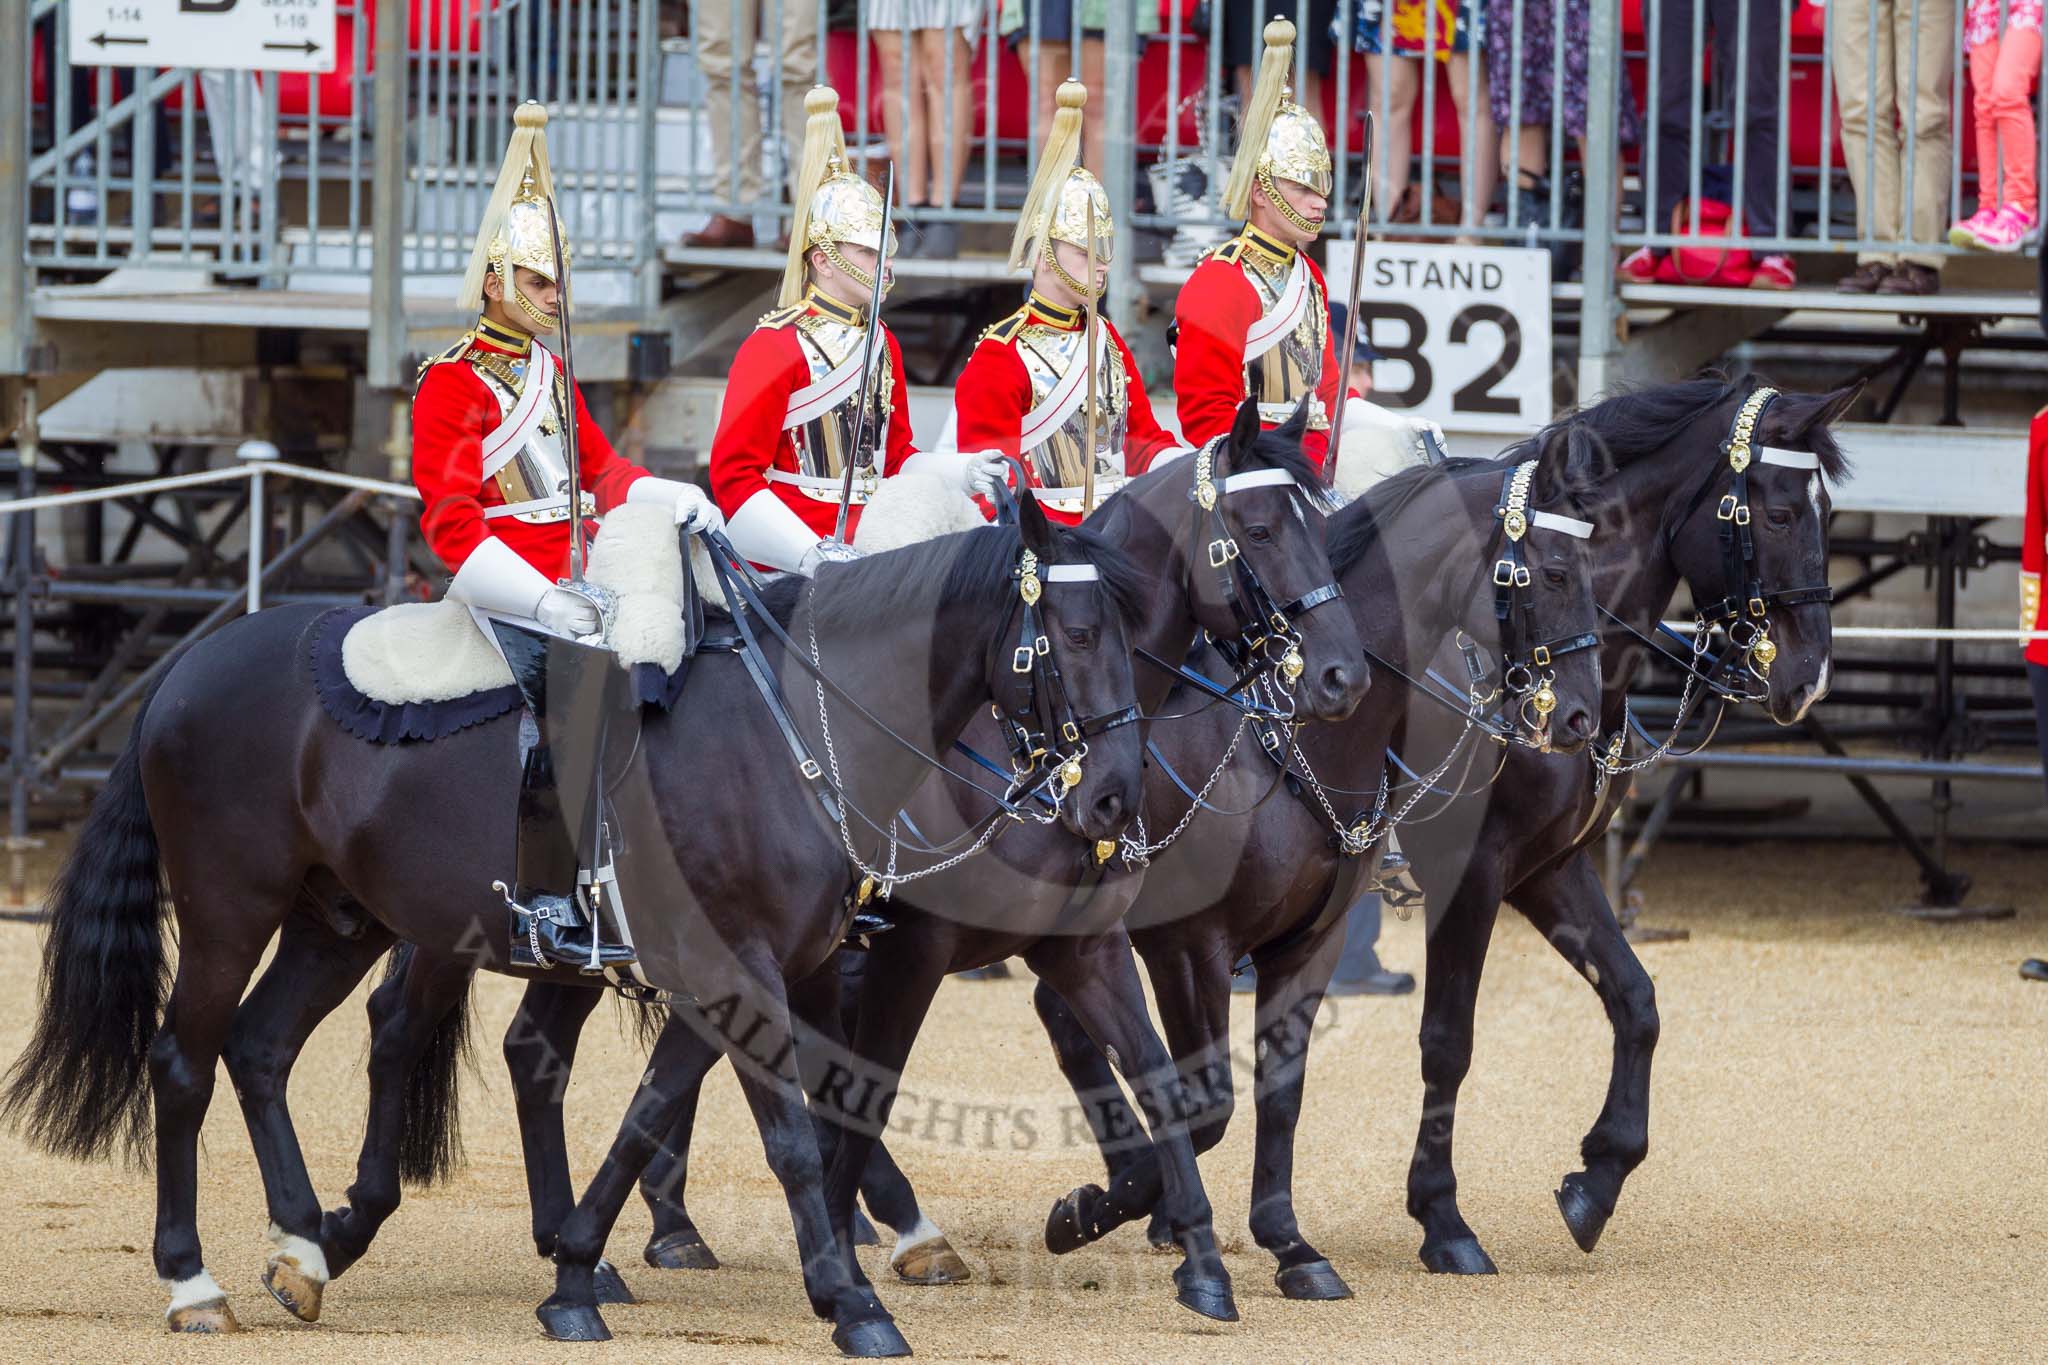 The Colonel's Review 2015.
Horse Guards Parade, Westminster,
London,

United Kingdom,
on 06 June 2015 at 10:56, image #165